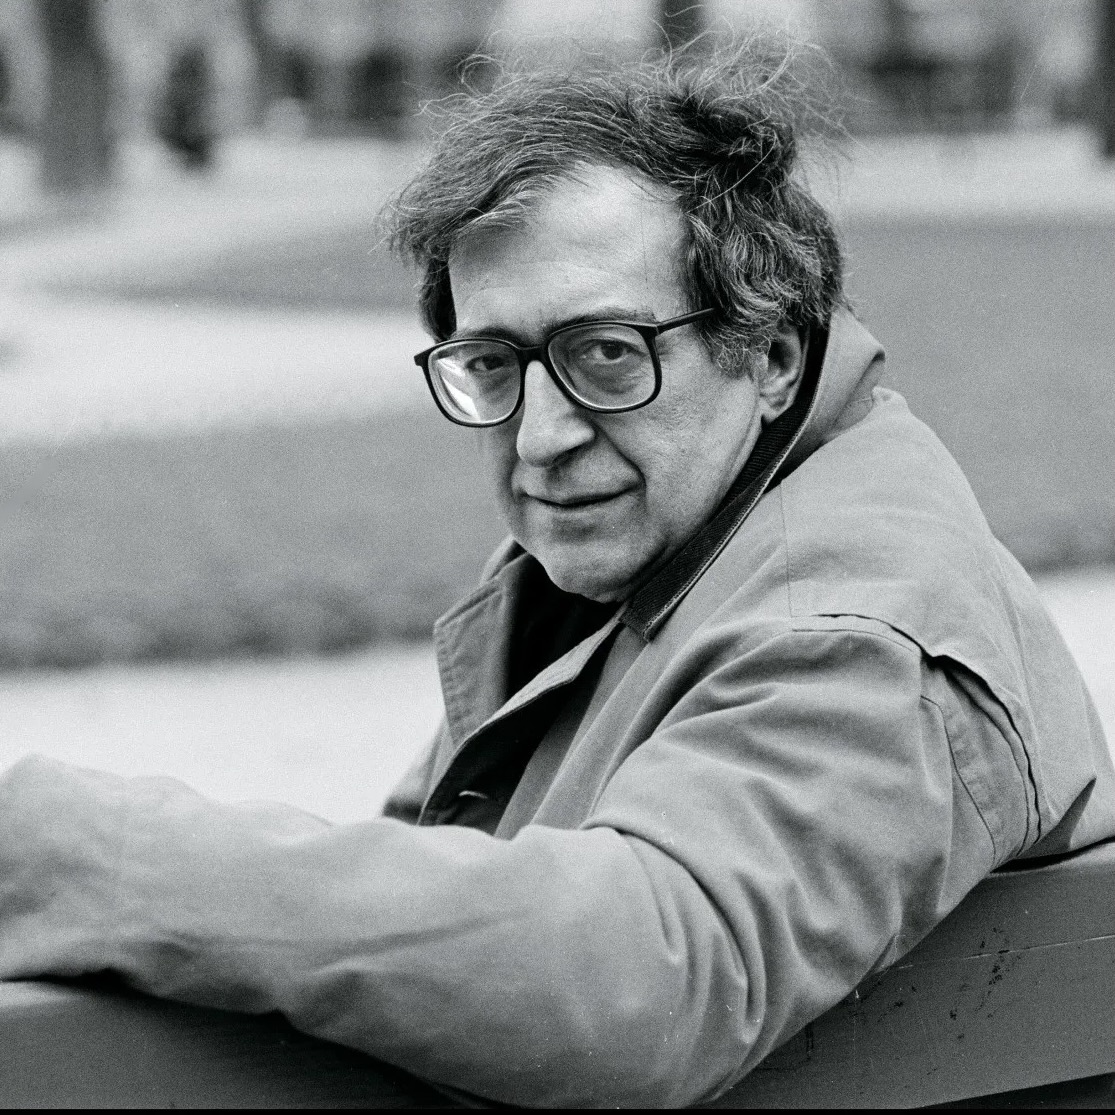 Luciano Berio sitting on a bench, head turned toward the camera.